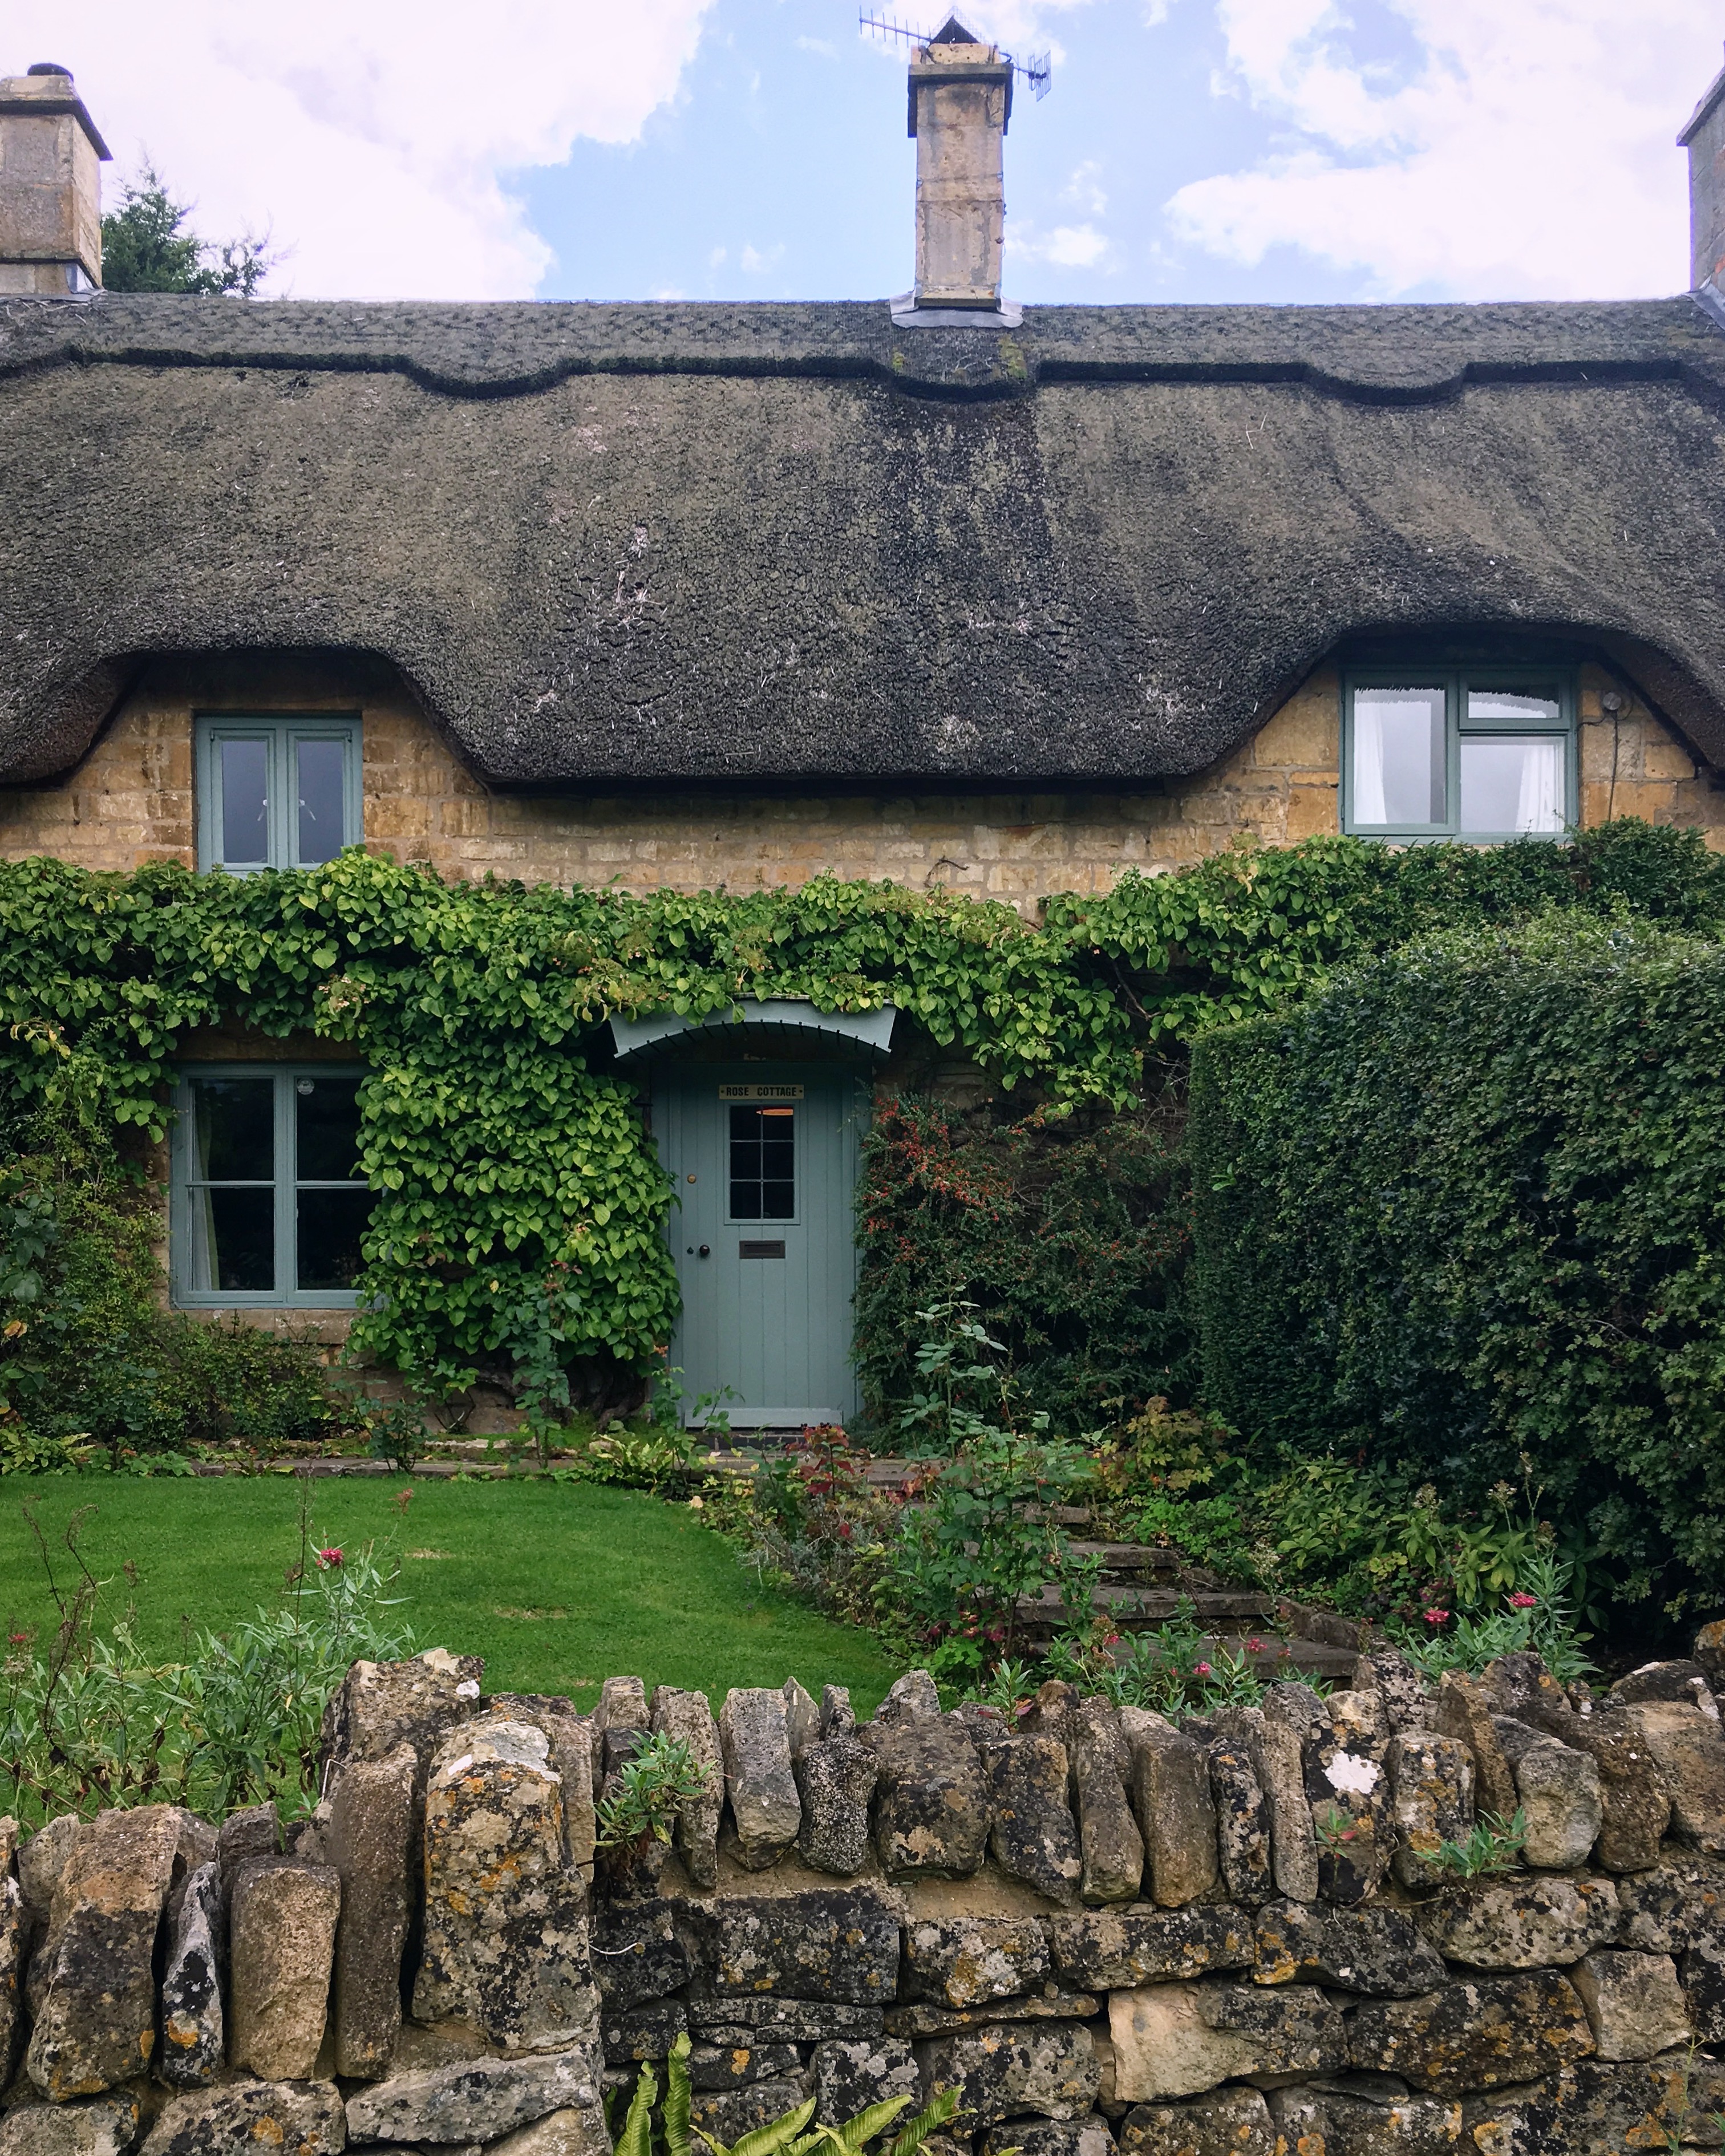 Thatched roof cottage in Chipping Campden